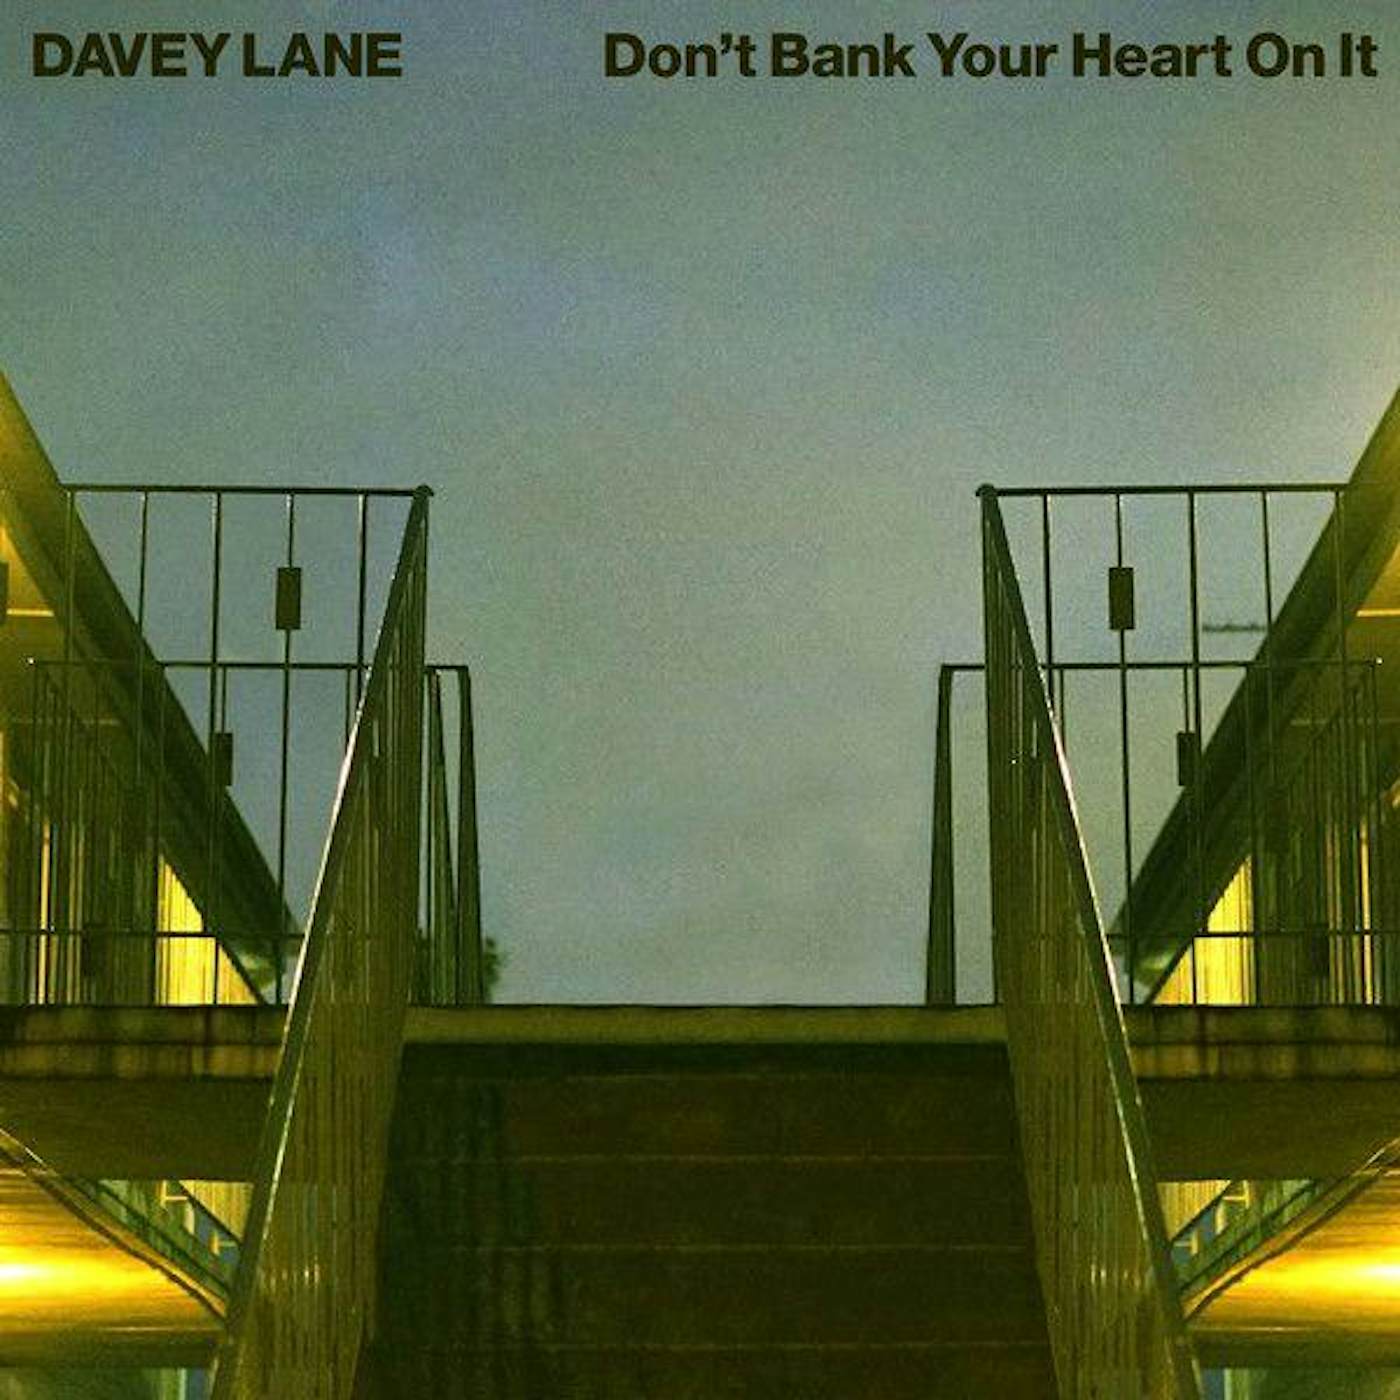 Davey Lane Don't Bank Your Heart On It Vinyl Record